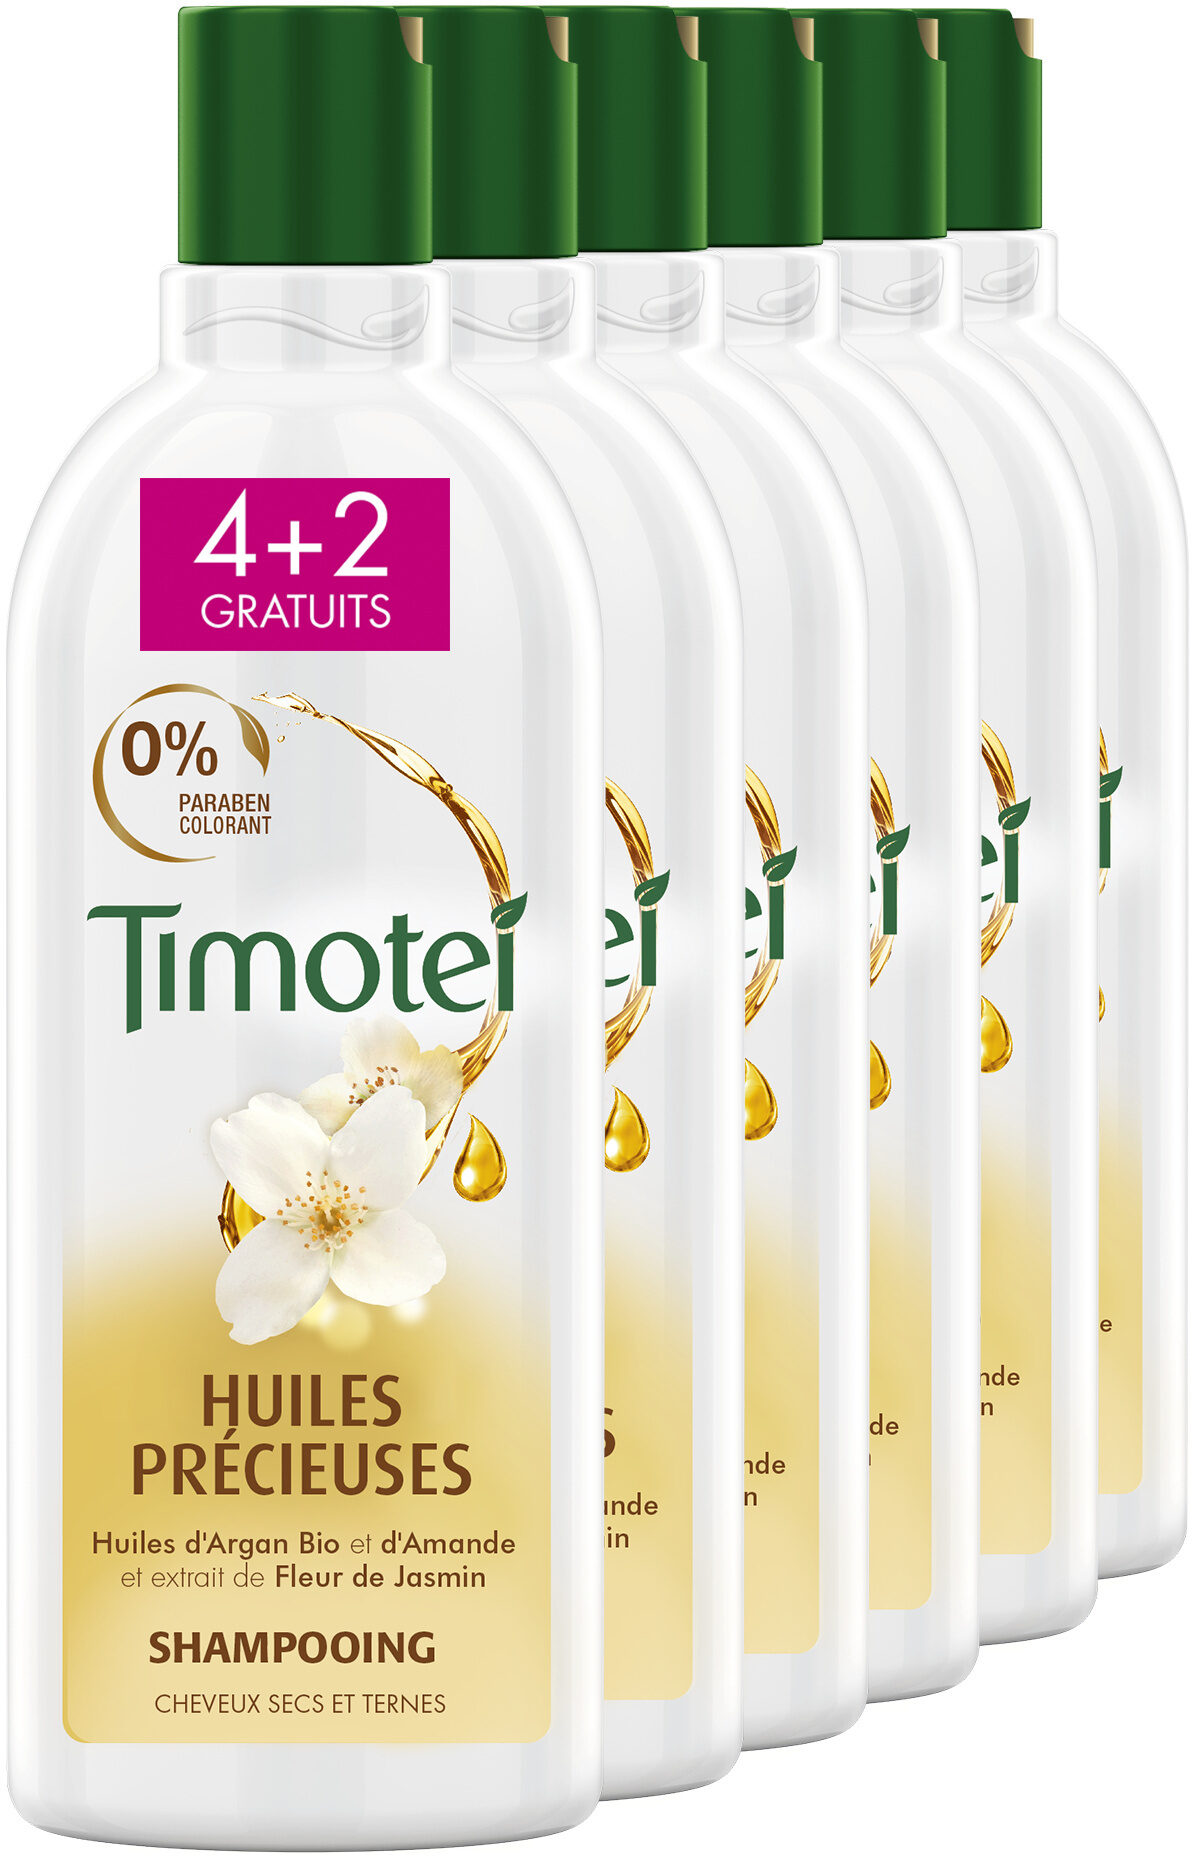 Timotei Shampoing Huiles Précieuses 300ml Lot de 6(4+2 Offerts) - Product - fr